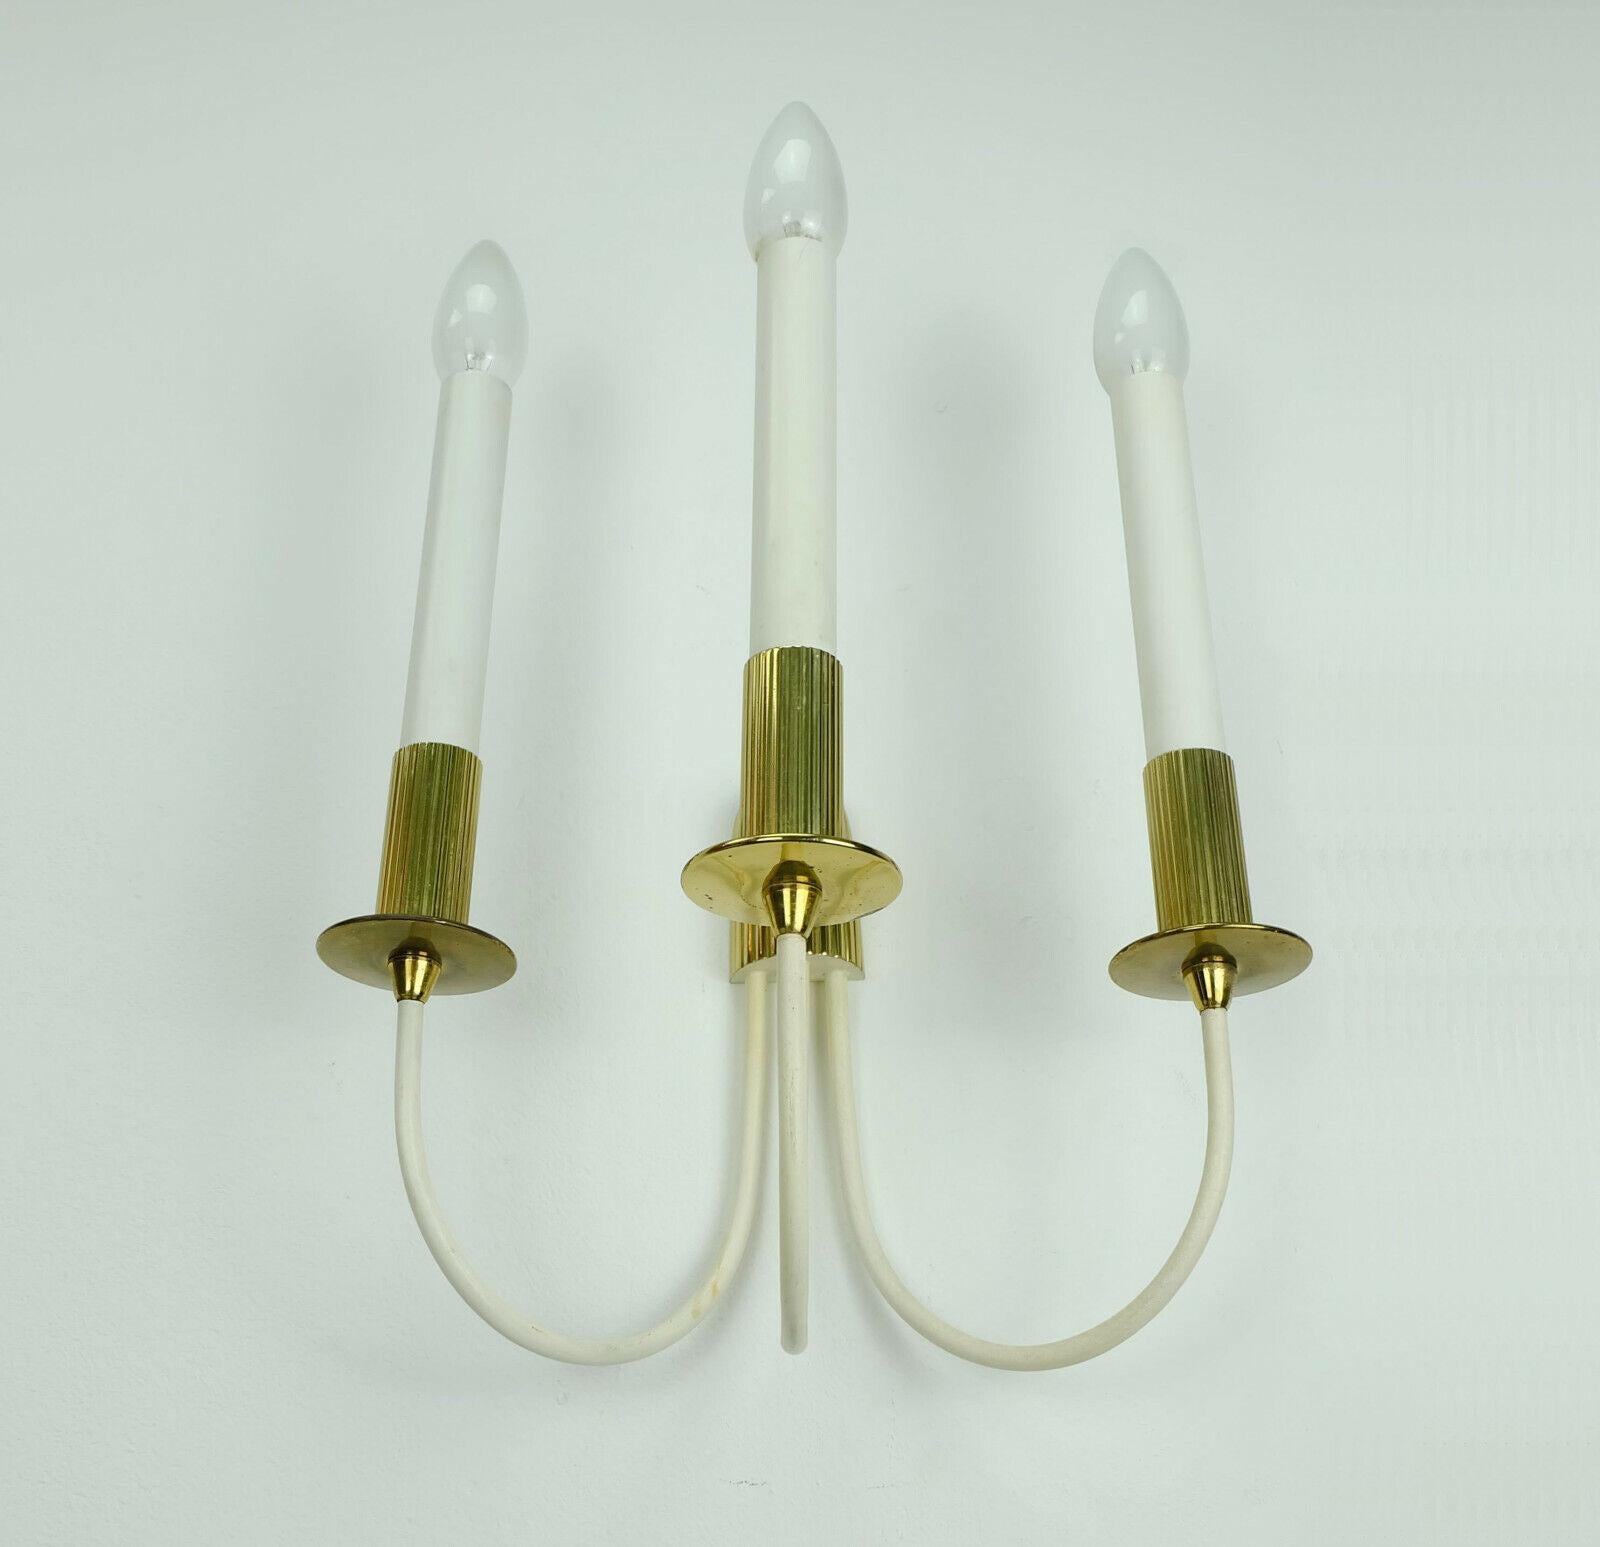 Large 1950s 60s Midcentury Sconce Brass White Metal Cinema Light For Sale 3